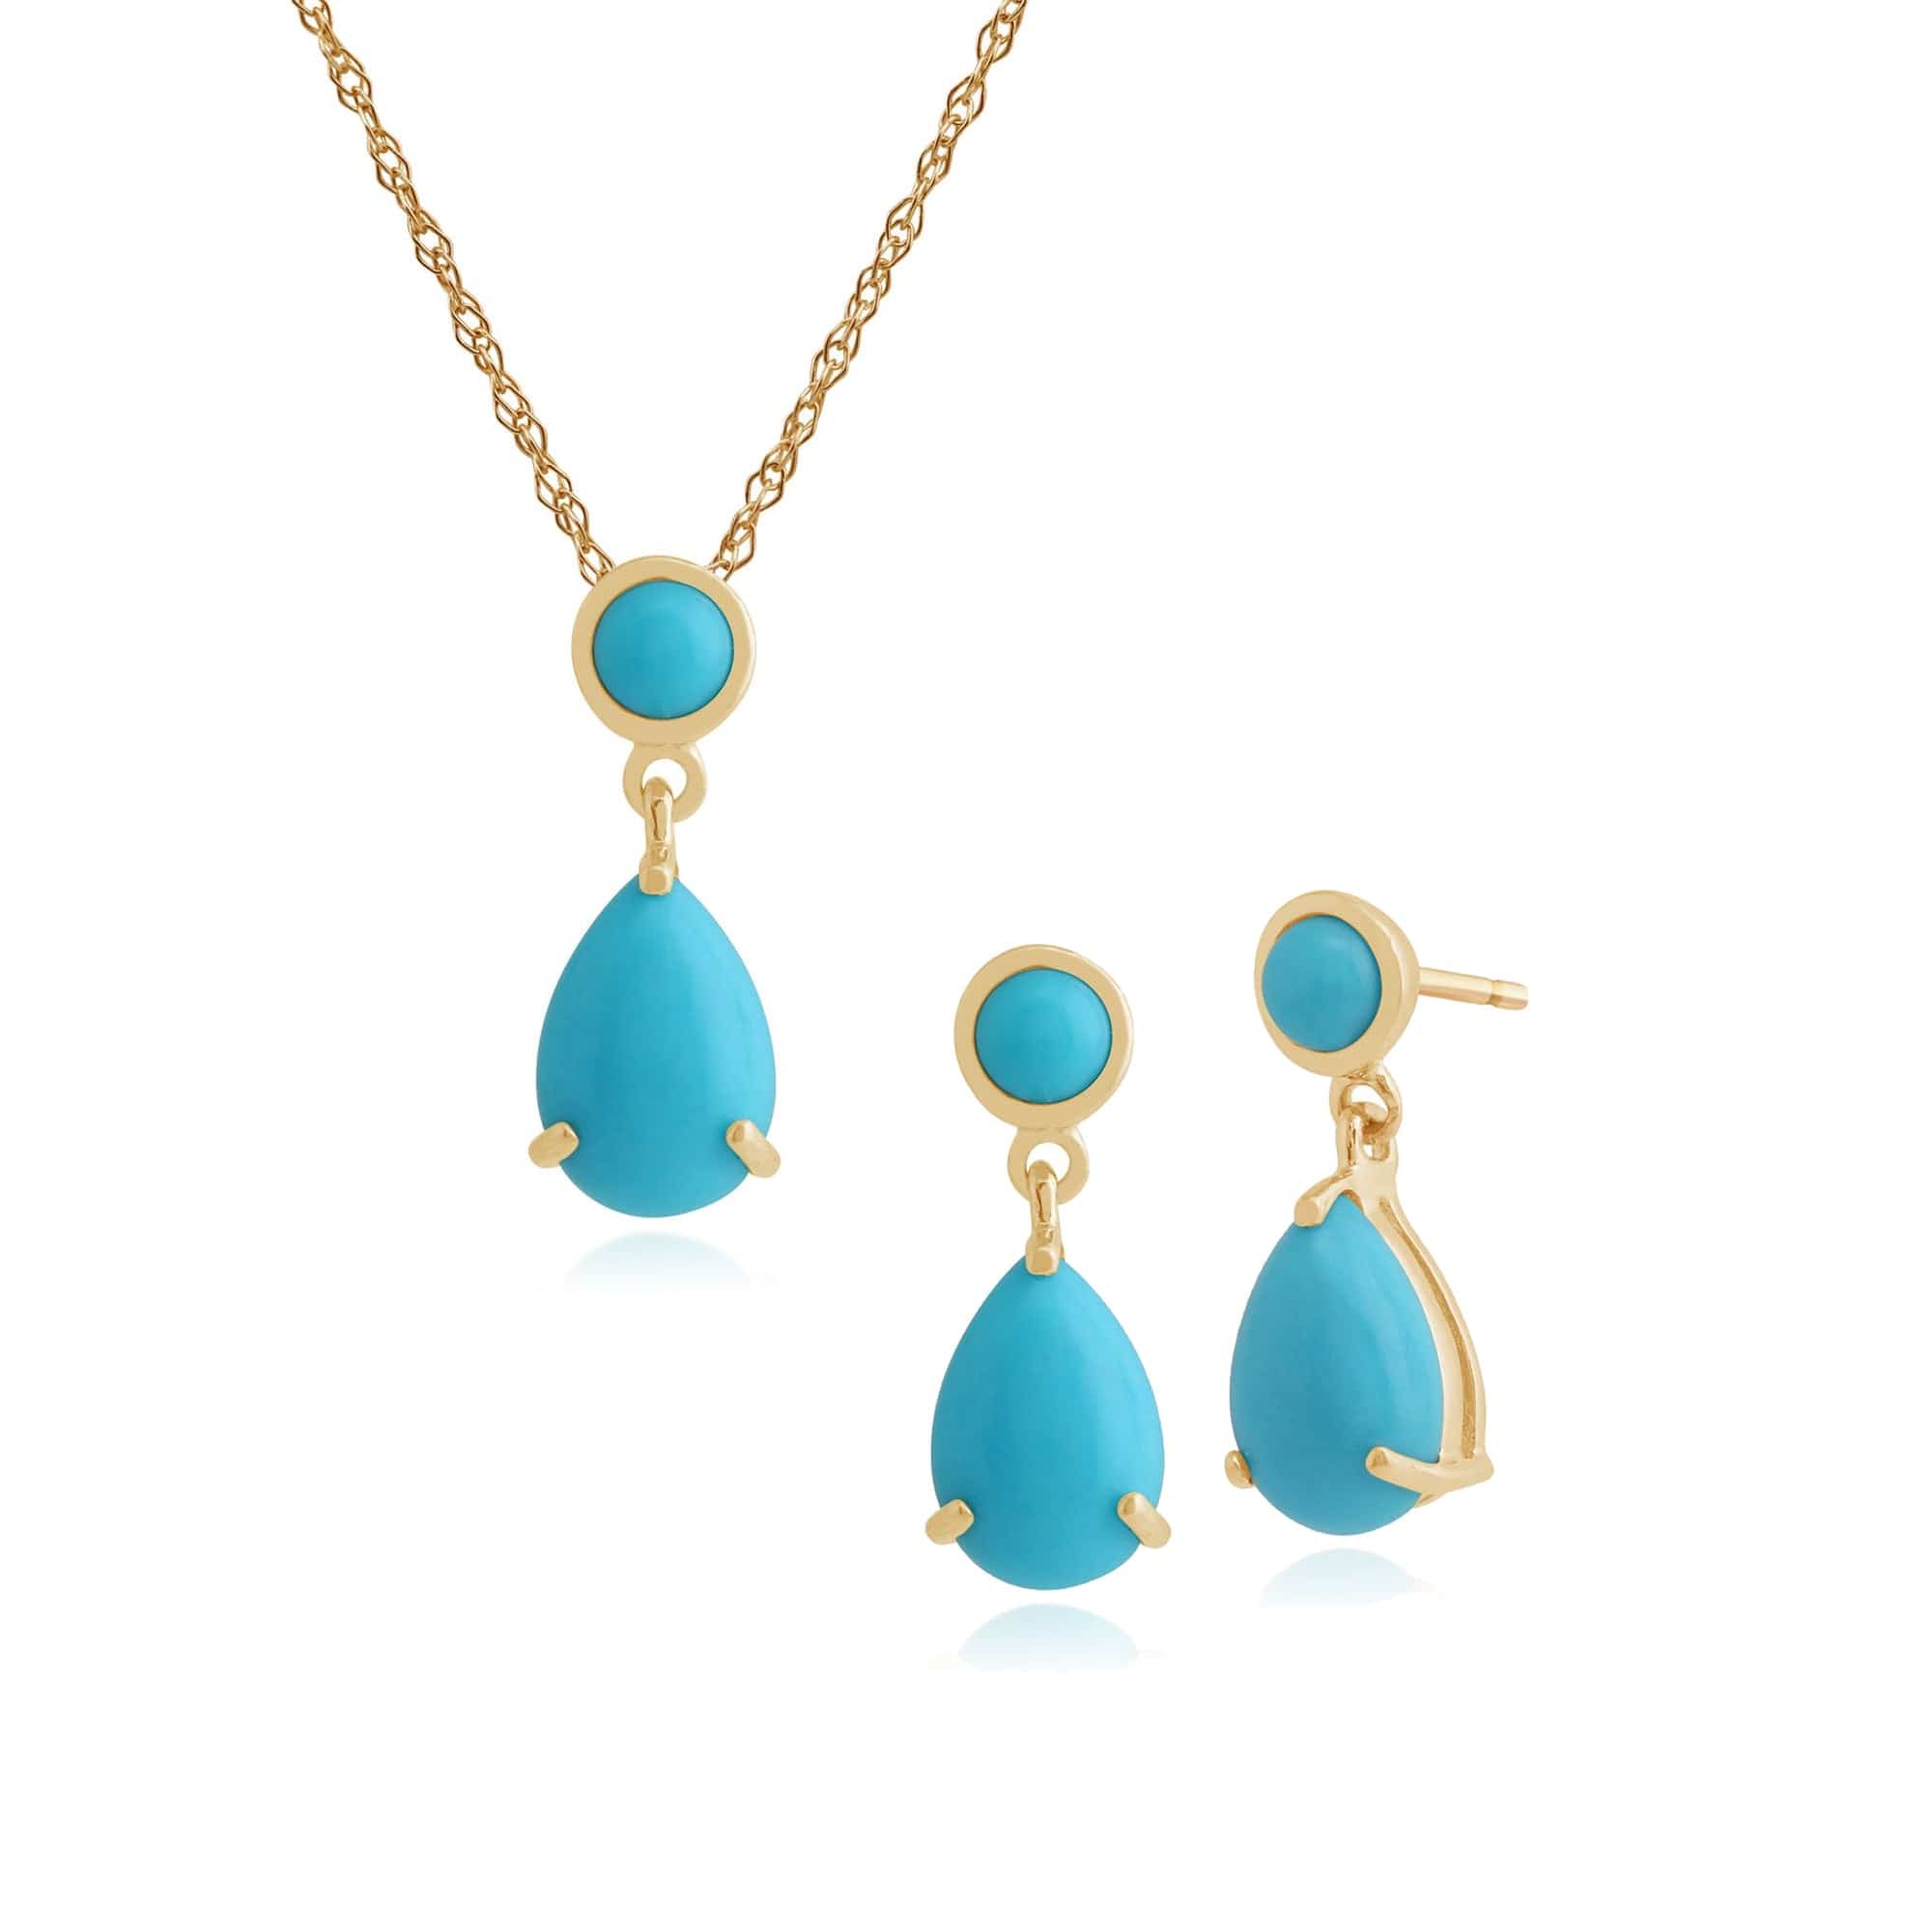 186E0148099-186P0188099 Classic Pear & Round Turquoise Drop Earrings & Pendant Set in 9ct Yellow Gold 1